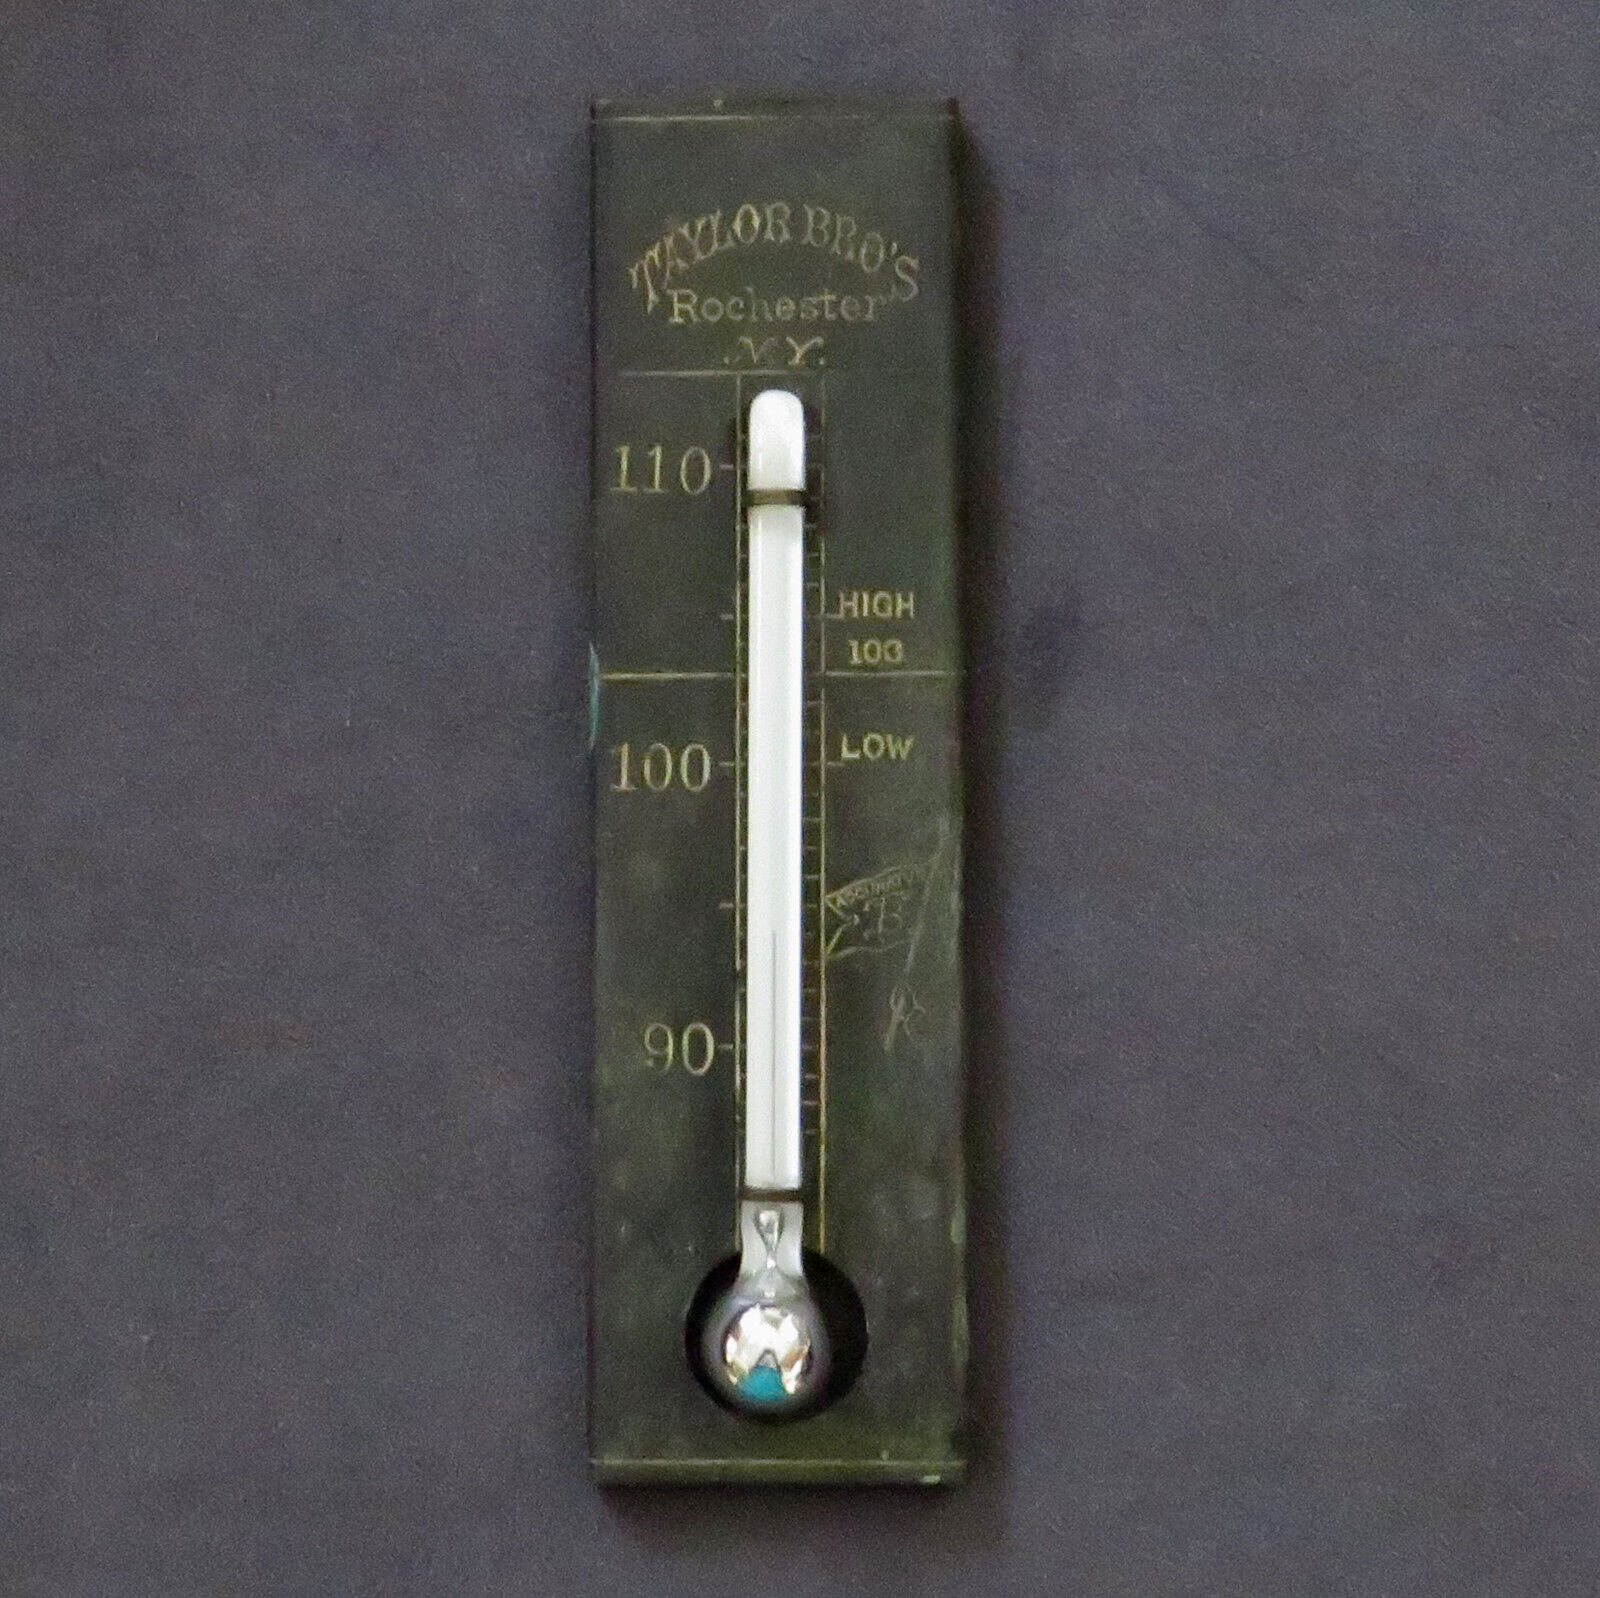 Antique Taylor Bros Rochester NY Working Thermometer 90-110 degrees